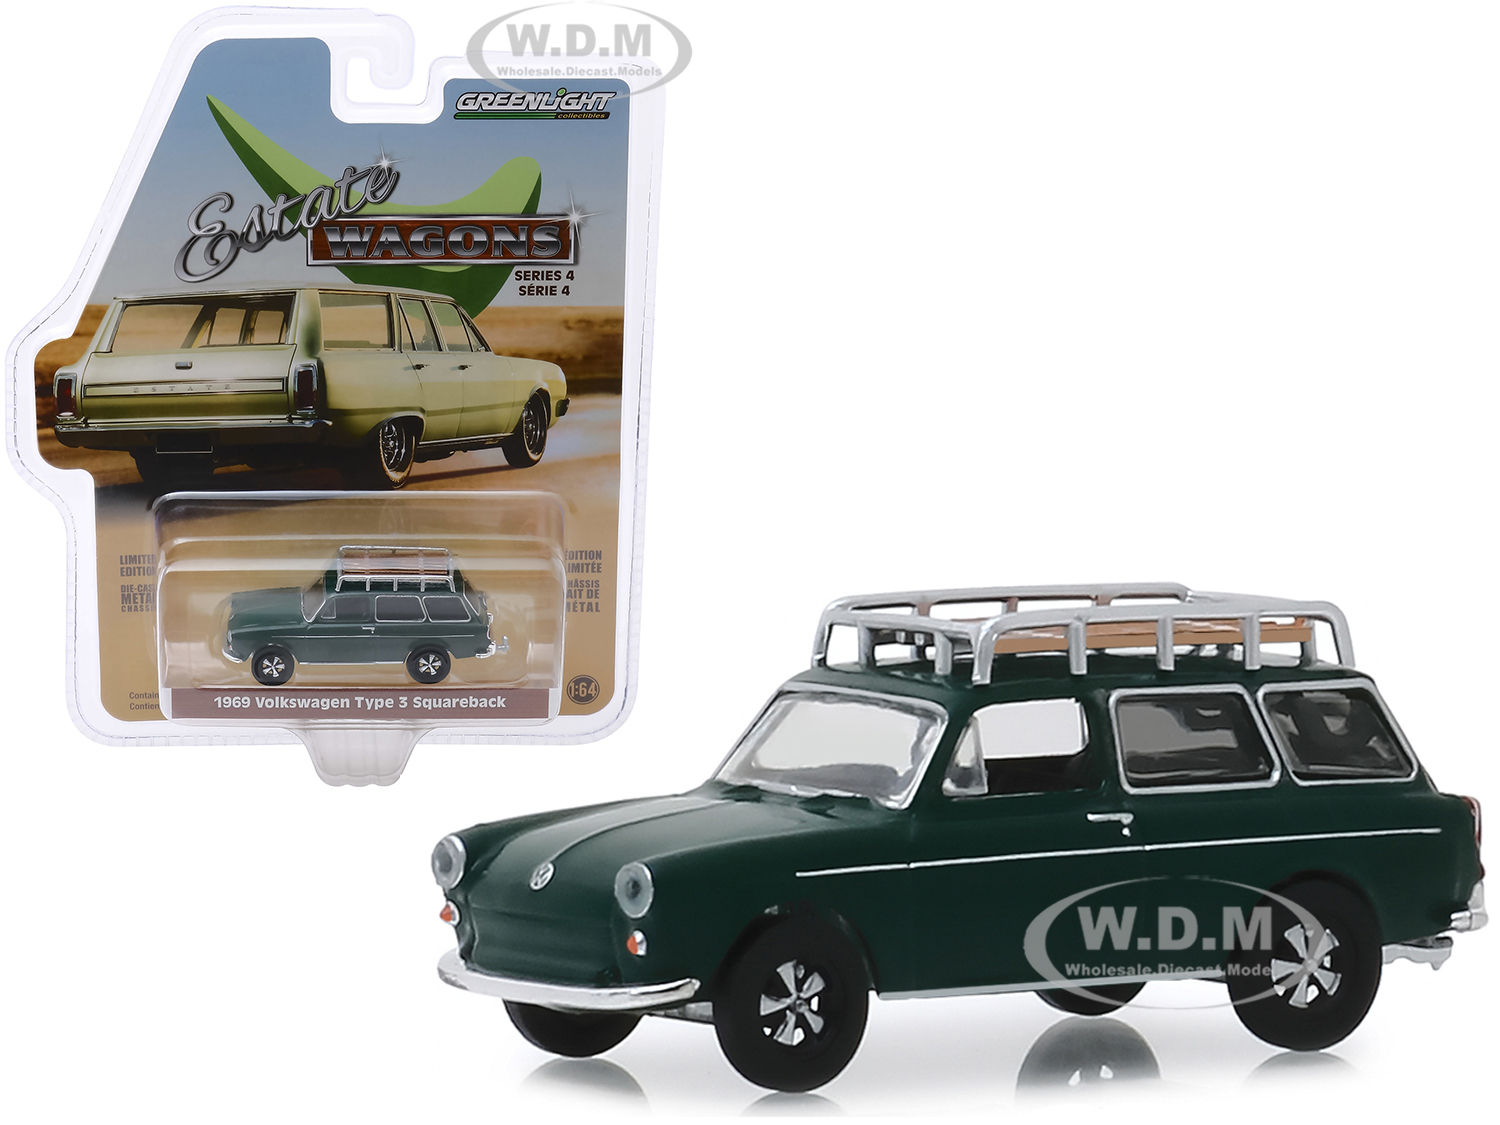 1969 Volkswagen Type 3 Squareback With Roof Rack Dark Green "estate Wagons" Series 4 1/64 Diecast Model Car By Greenlight